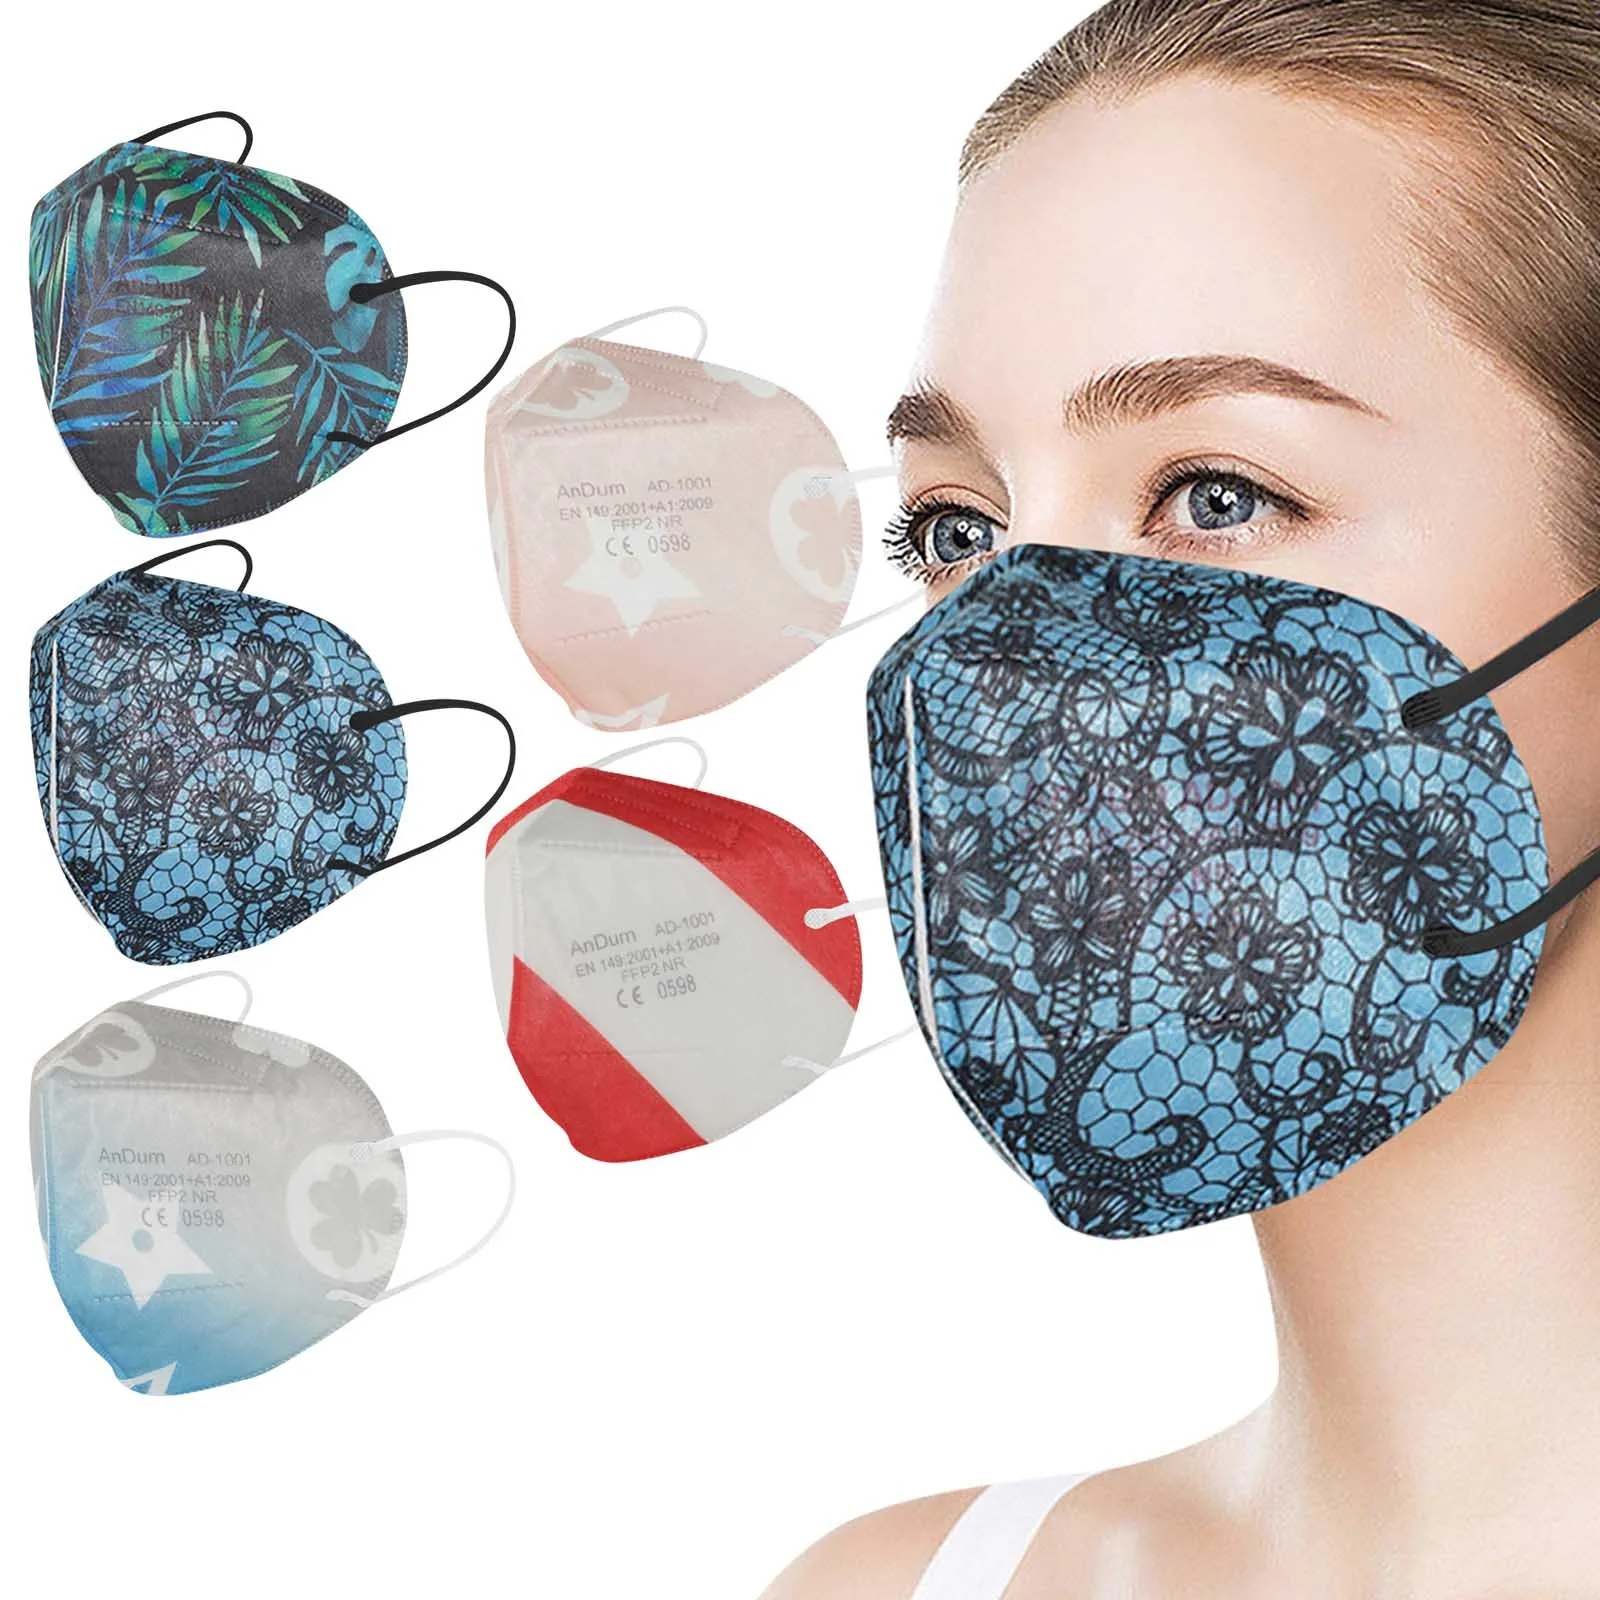 

10pcs 5-layer High-density Masks For Adult Pm2.5 Wind And Mist Pollution Protection Filter 3d Mouth Mask Cover Masque Decoration